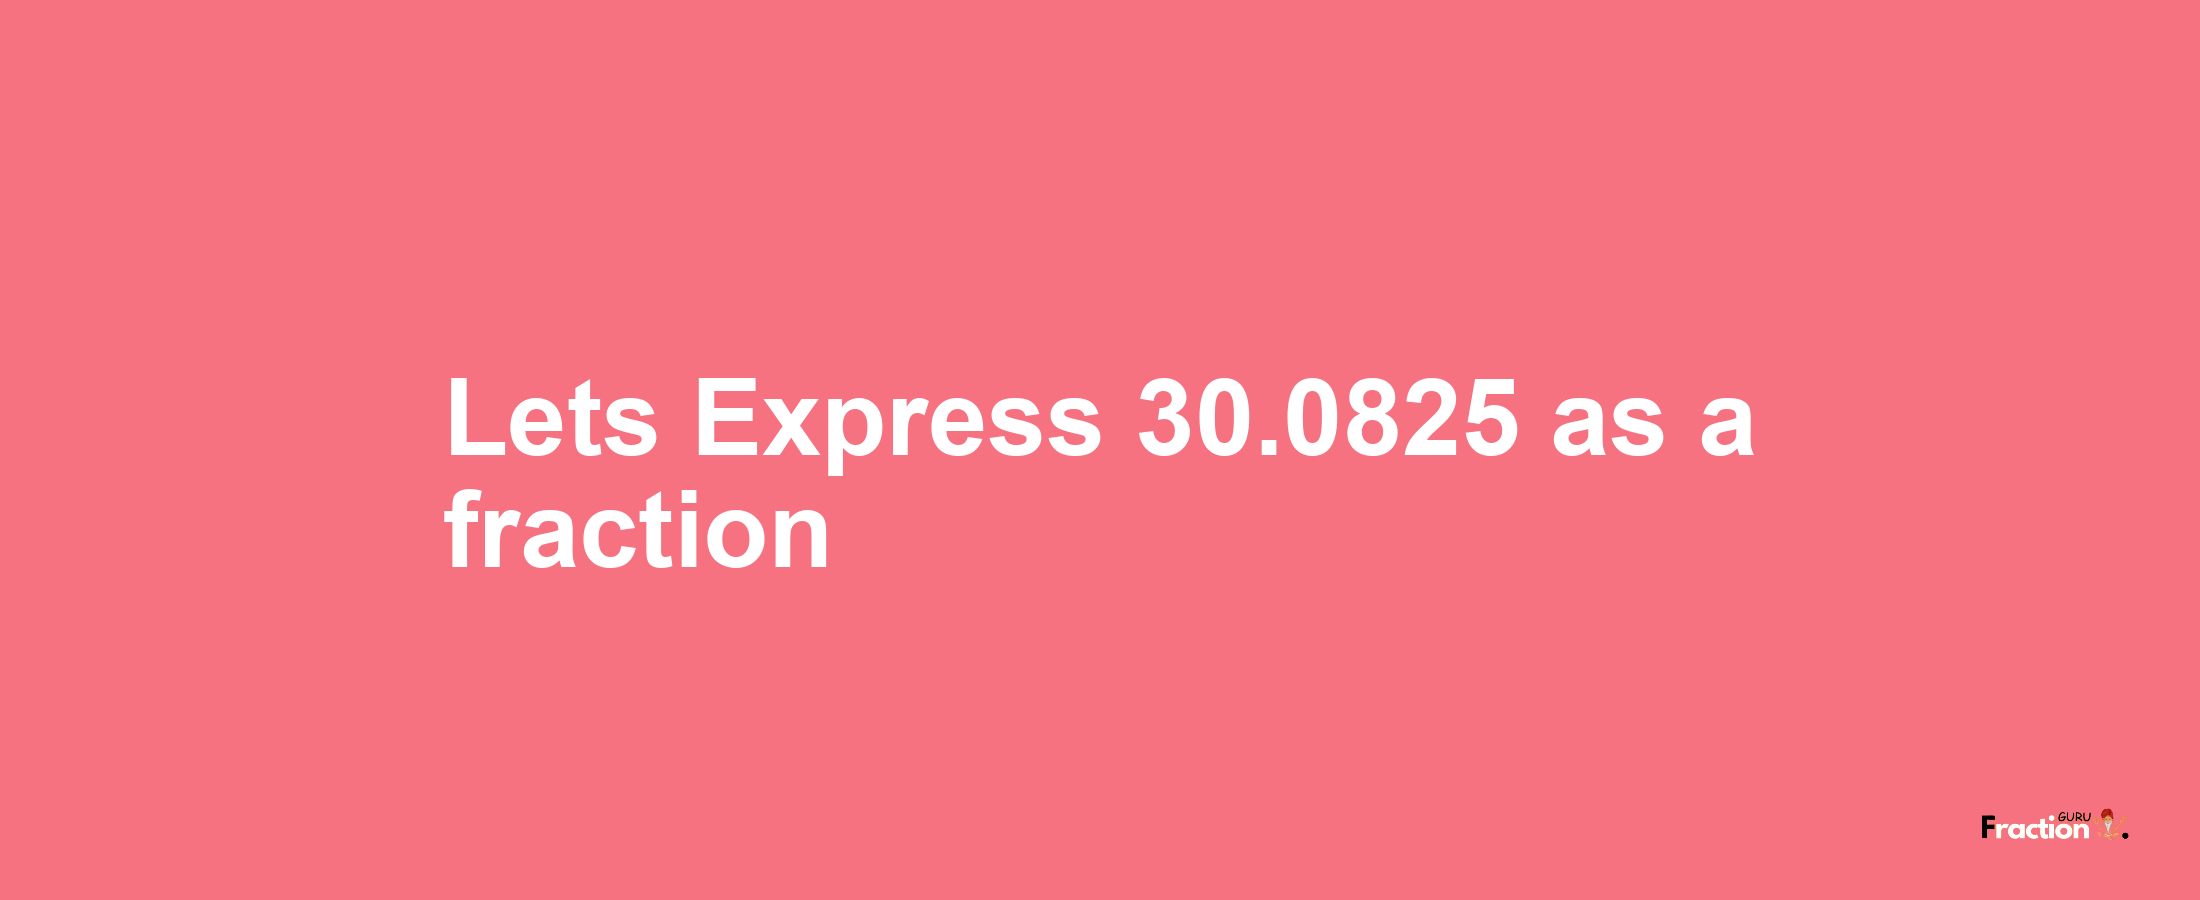 Lets Express 30.0825 as afraction